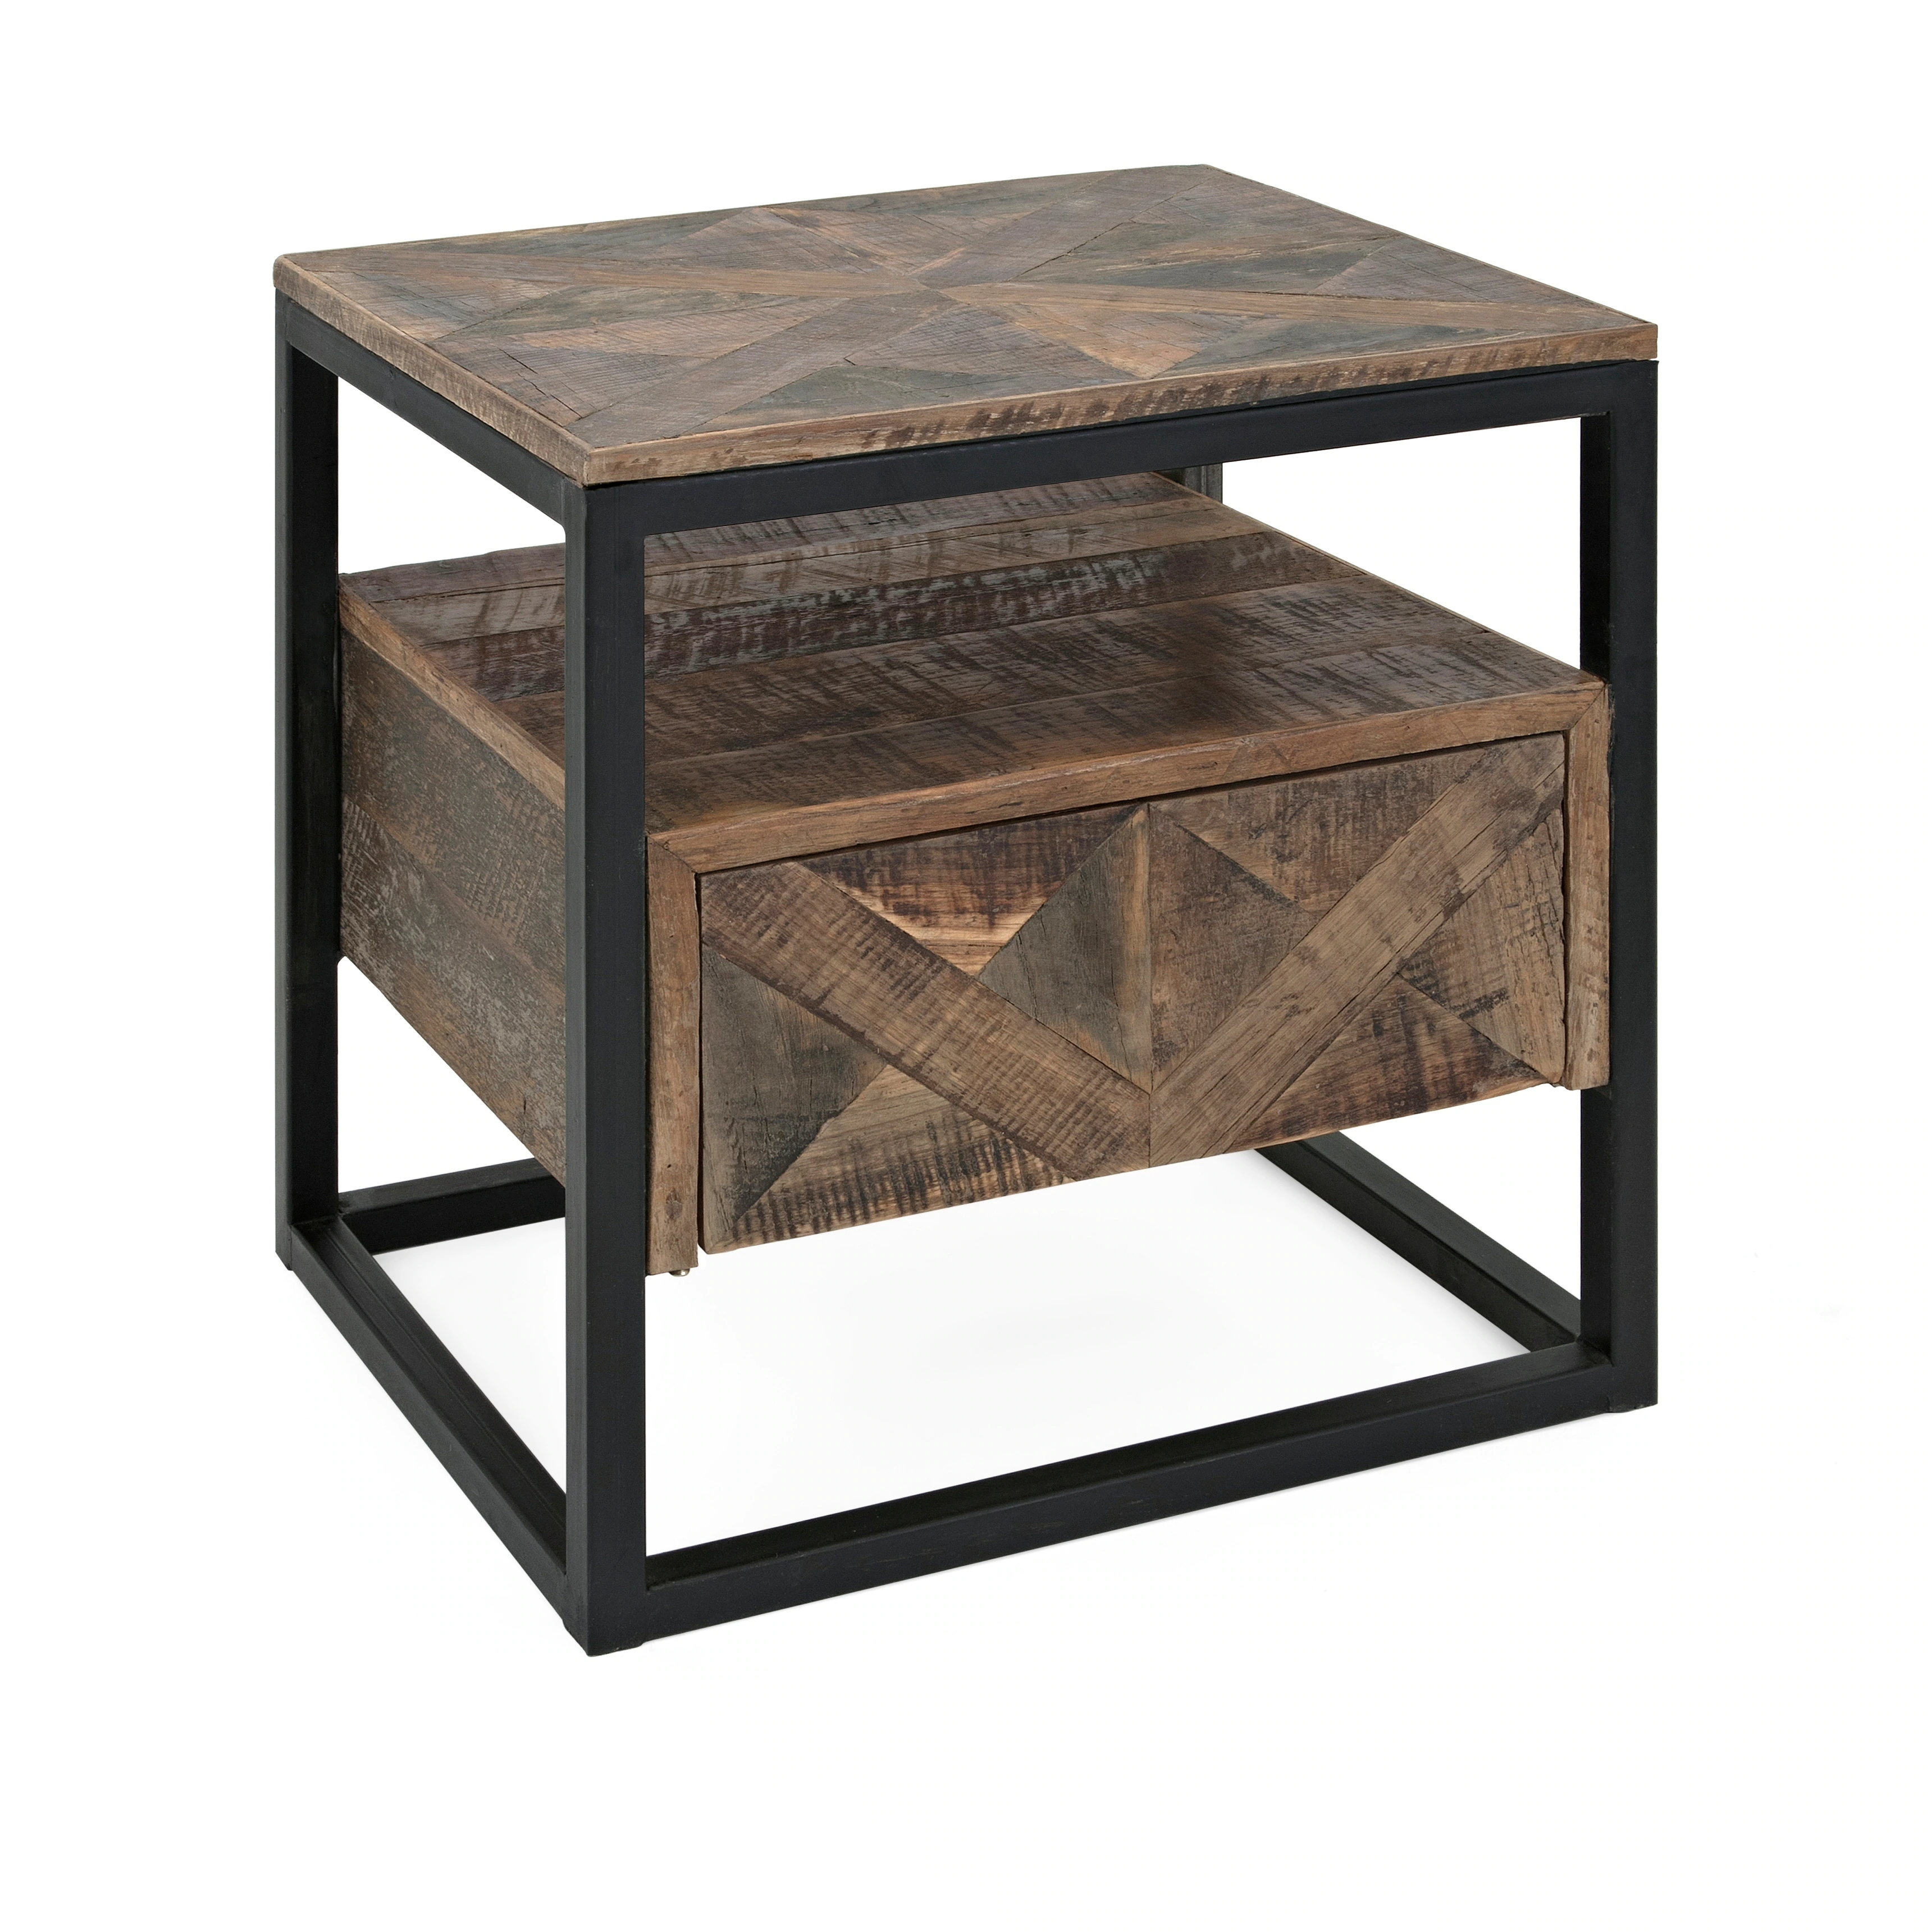 loxias black and brown reclaimed wood accent table iron end free shipping today railroad cart coffee wayborn tables lamp clear acrylic sofa powell storage acme furniture chairs